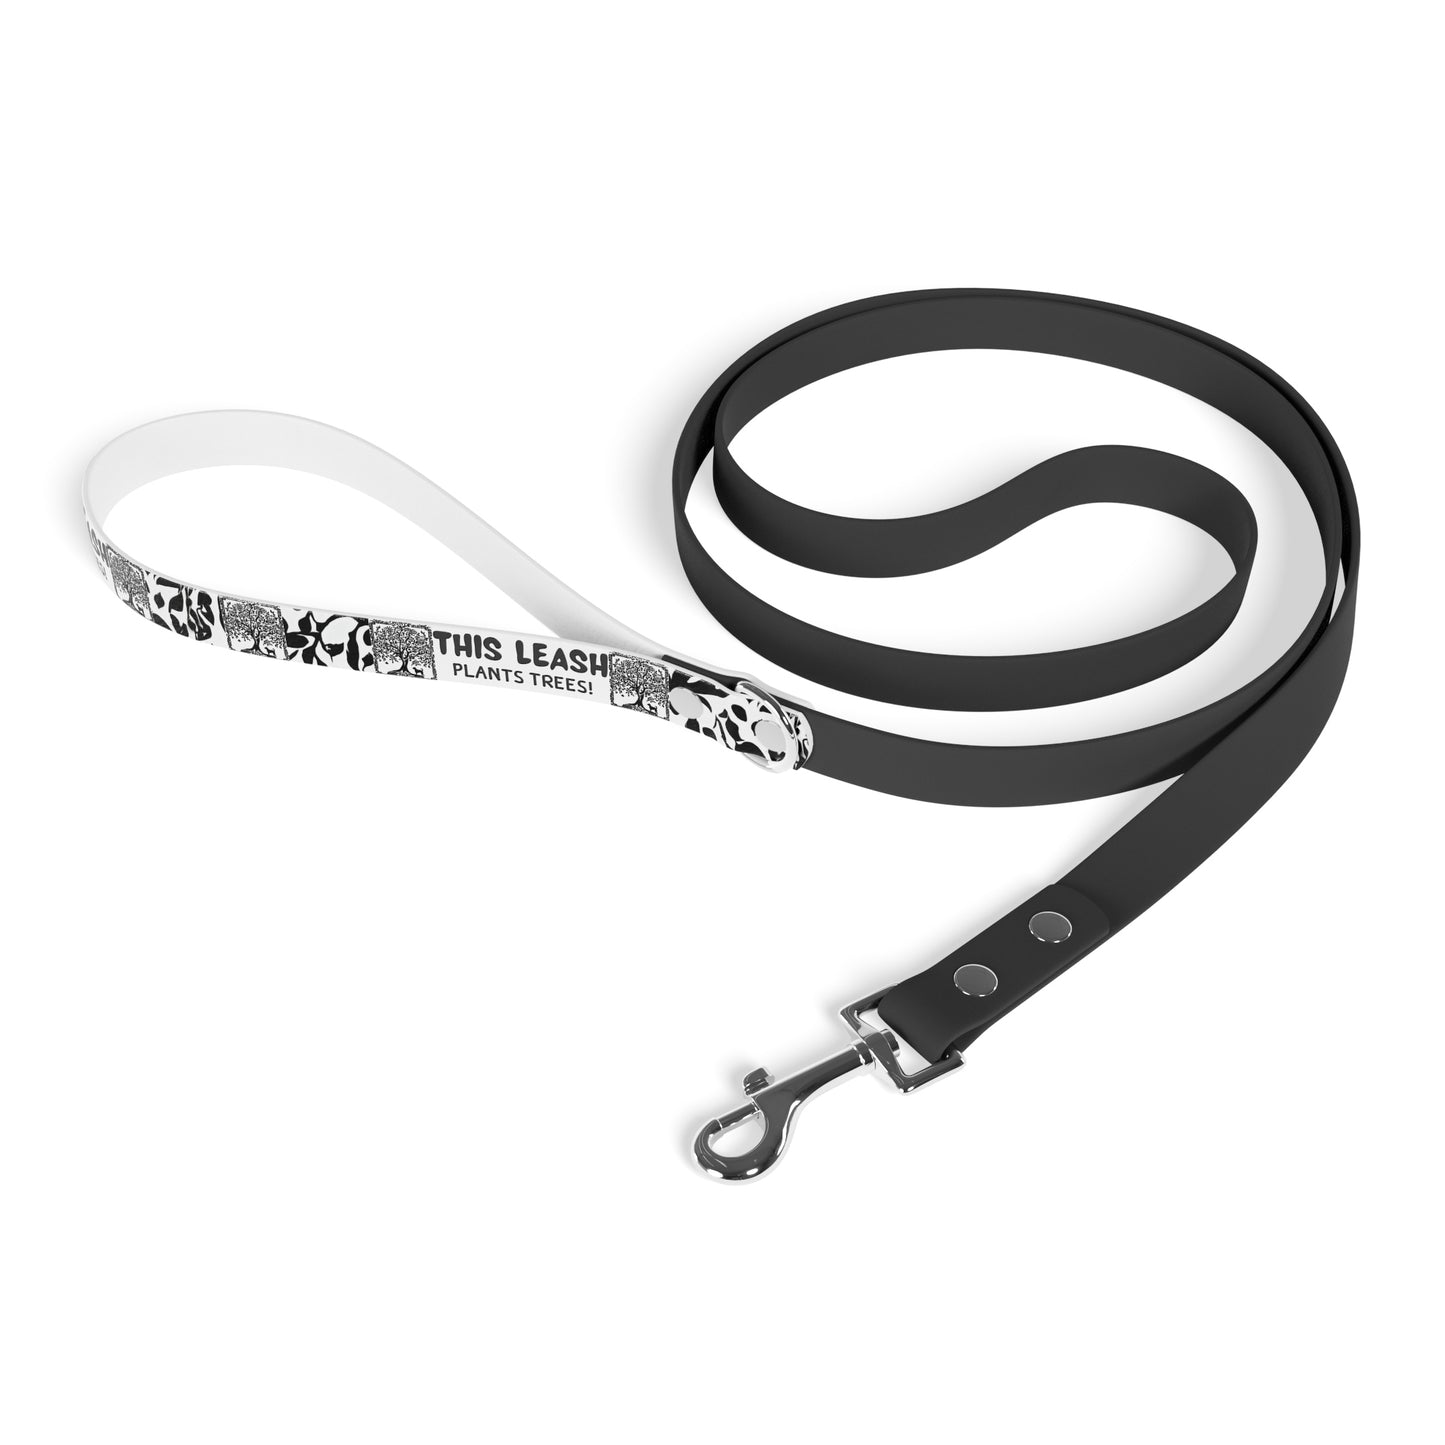 Dog Leash, Black and White Floral Pattern, Recyclable TPU Handle, Ecofriendly